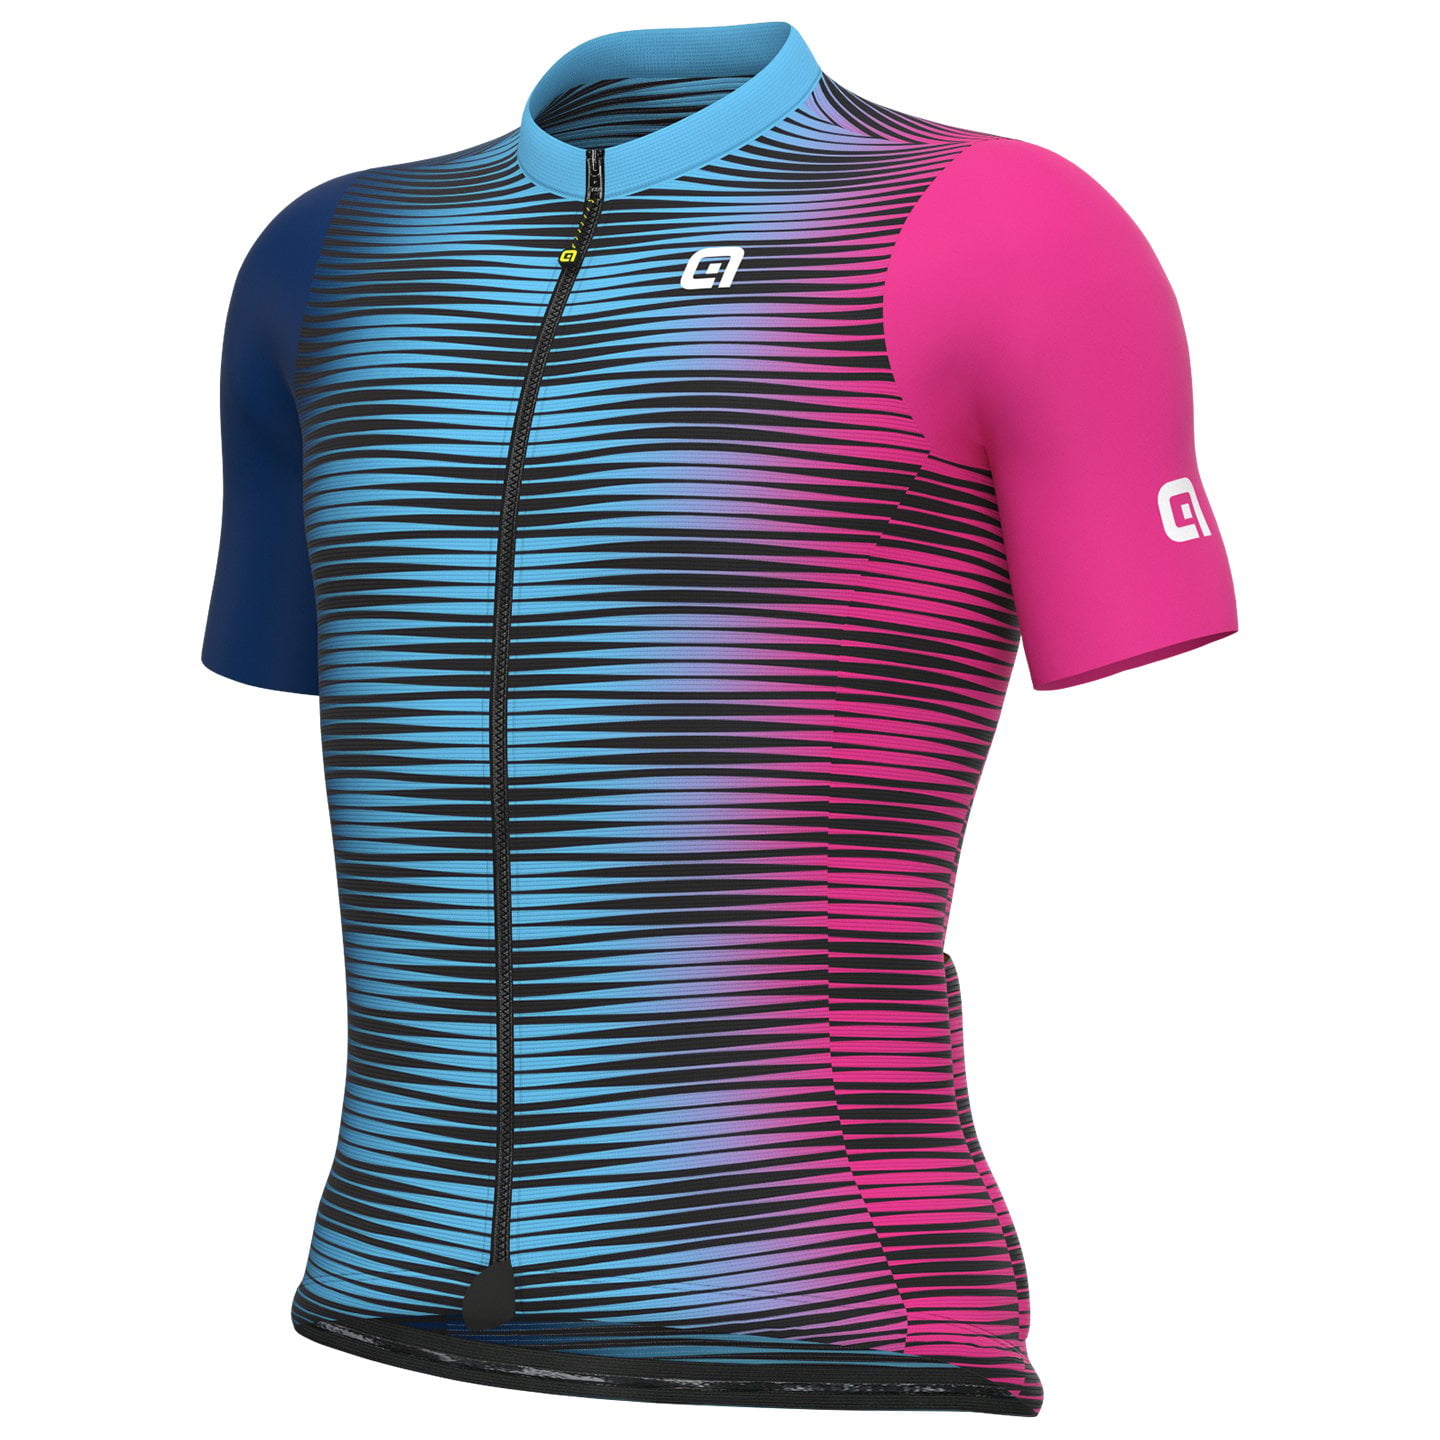 ALE Dinamica Short Sleeve Jersey Short Sleeve Jersey, for men, size 2XL, Cycling jersey, Cycle clothing